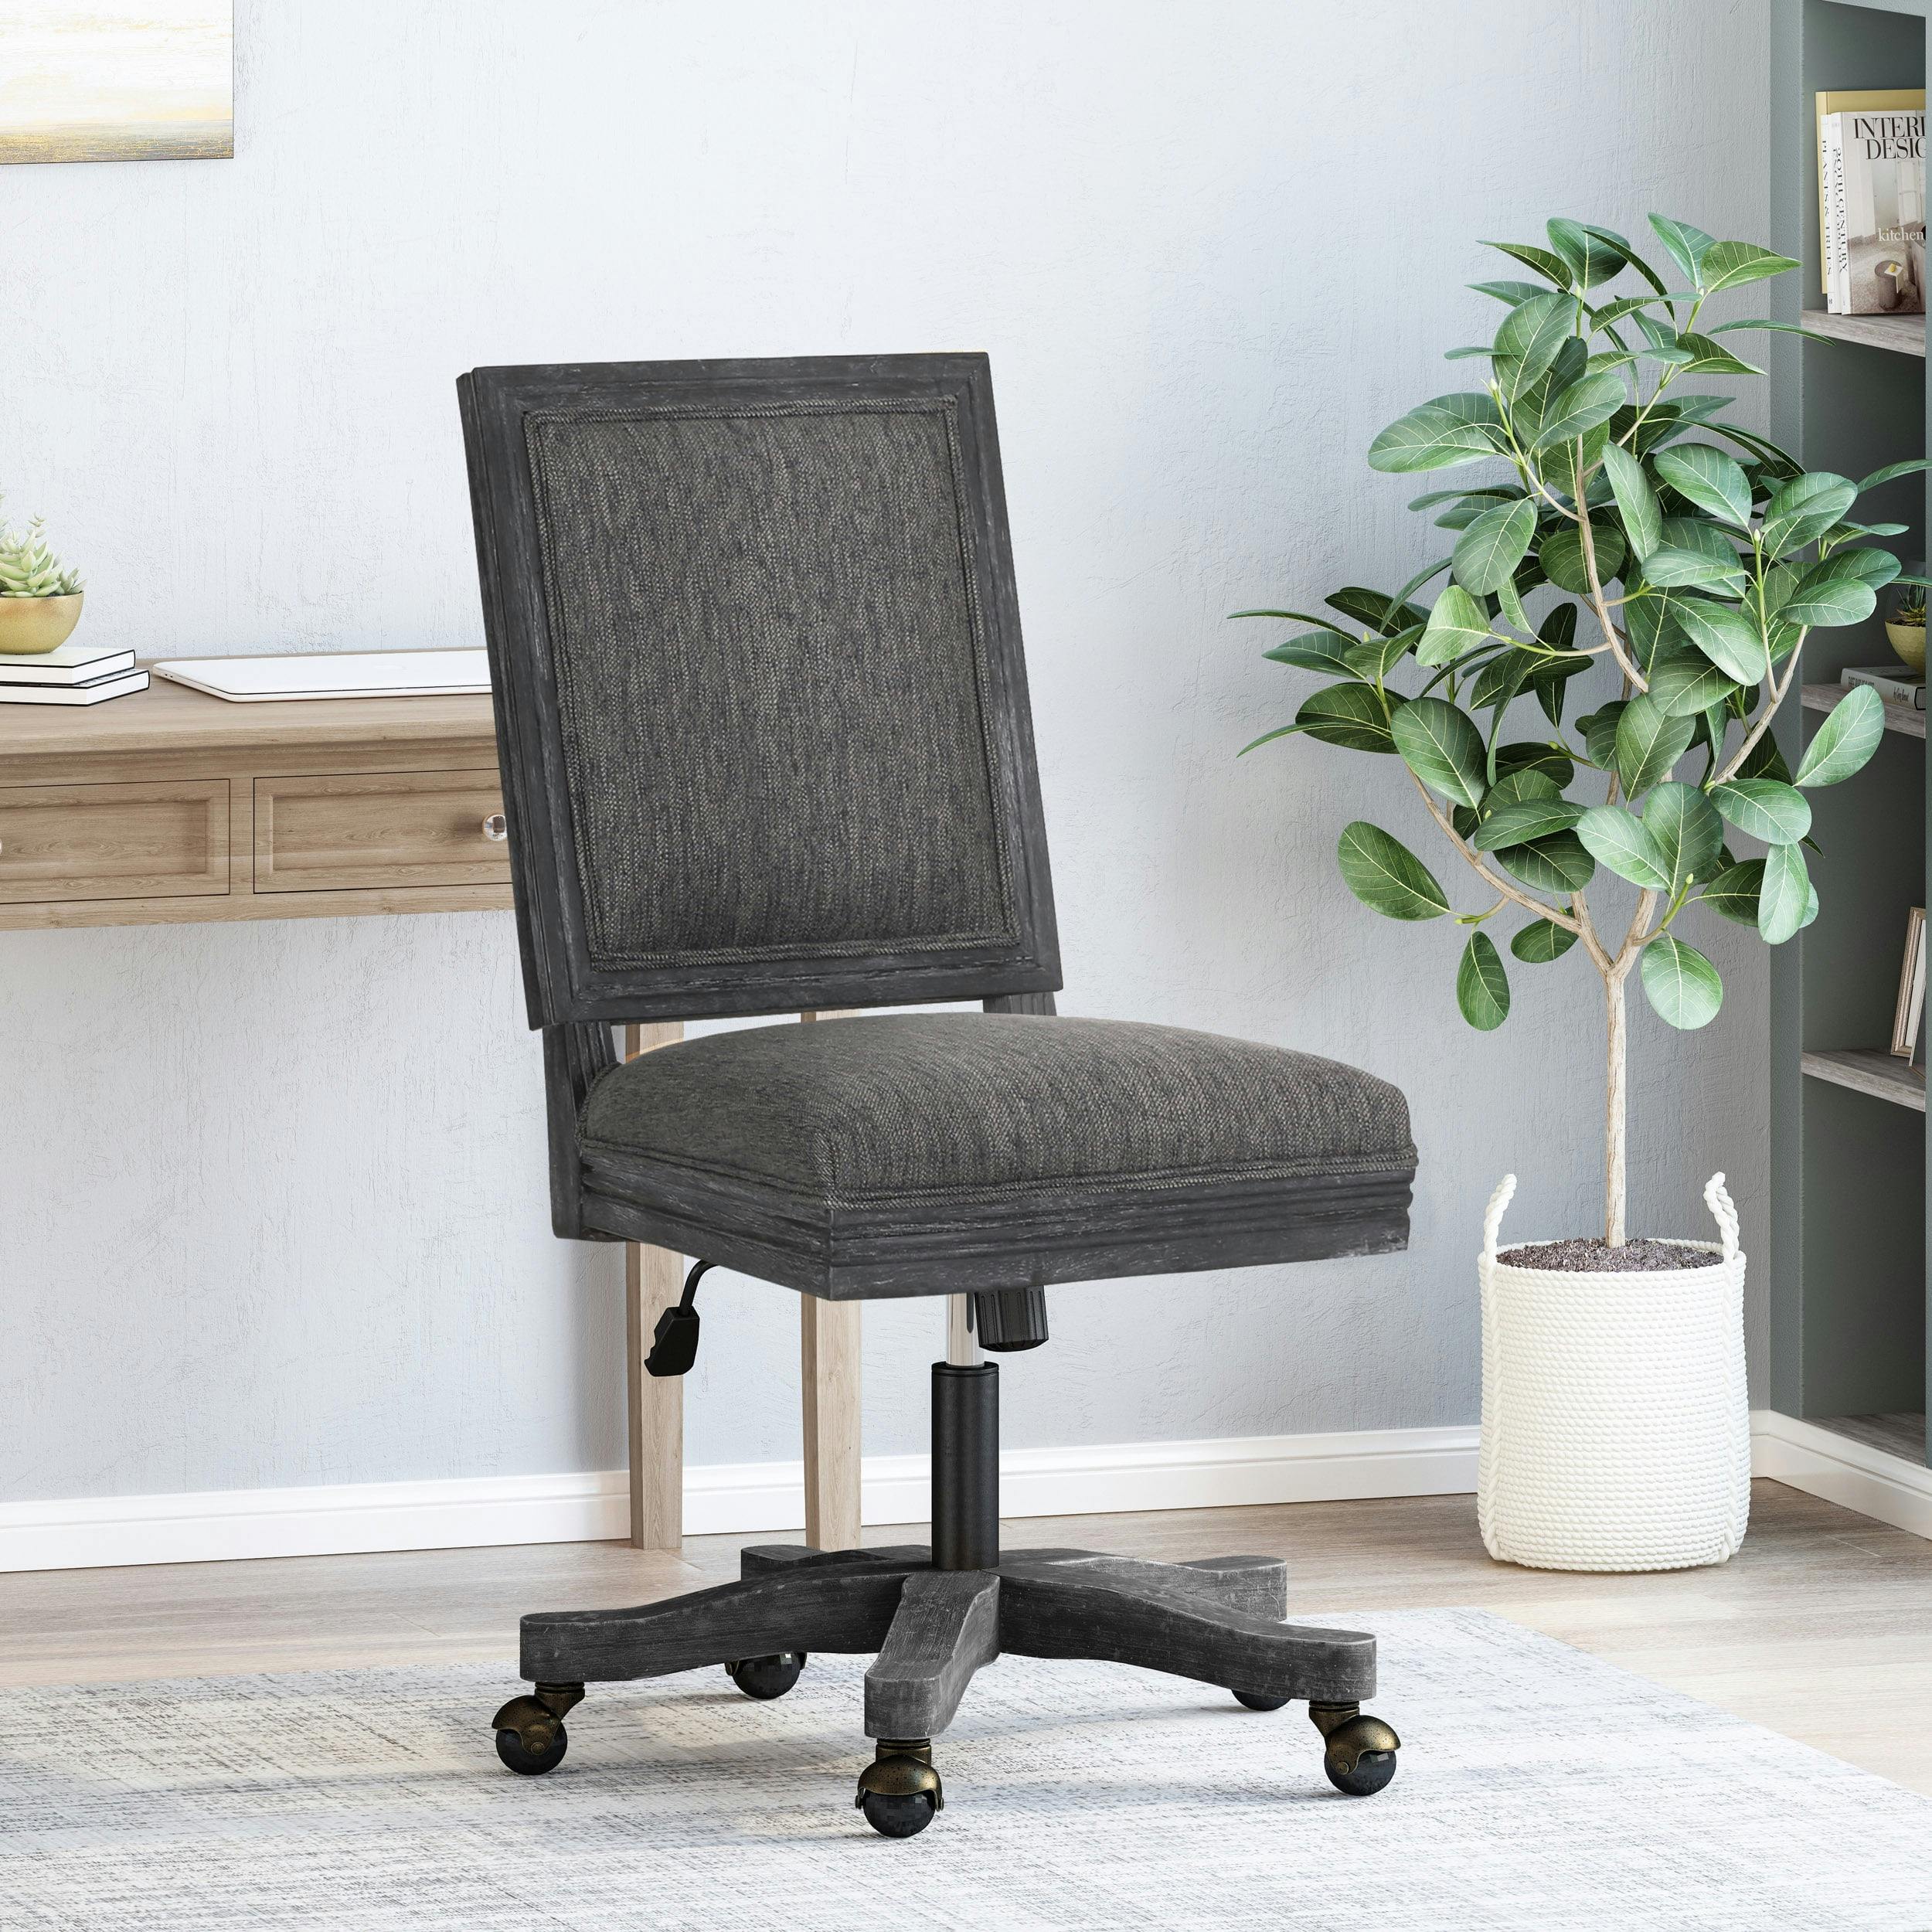 Rustic Gray Upholstered Swivel Office Chair with Distressed Wood Frame